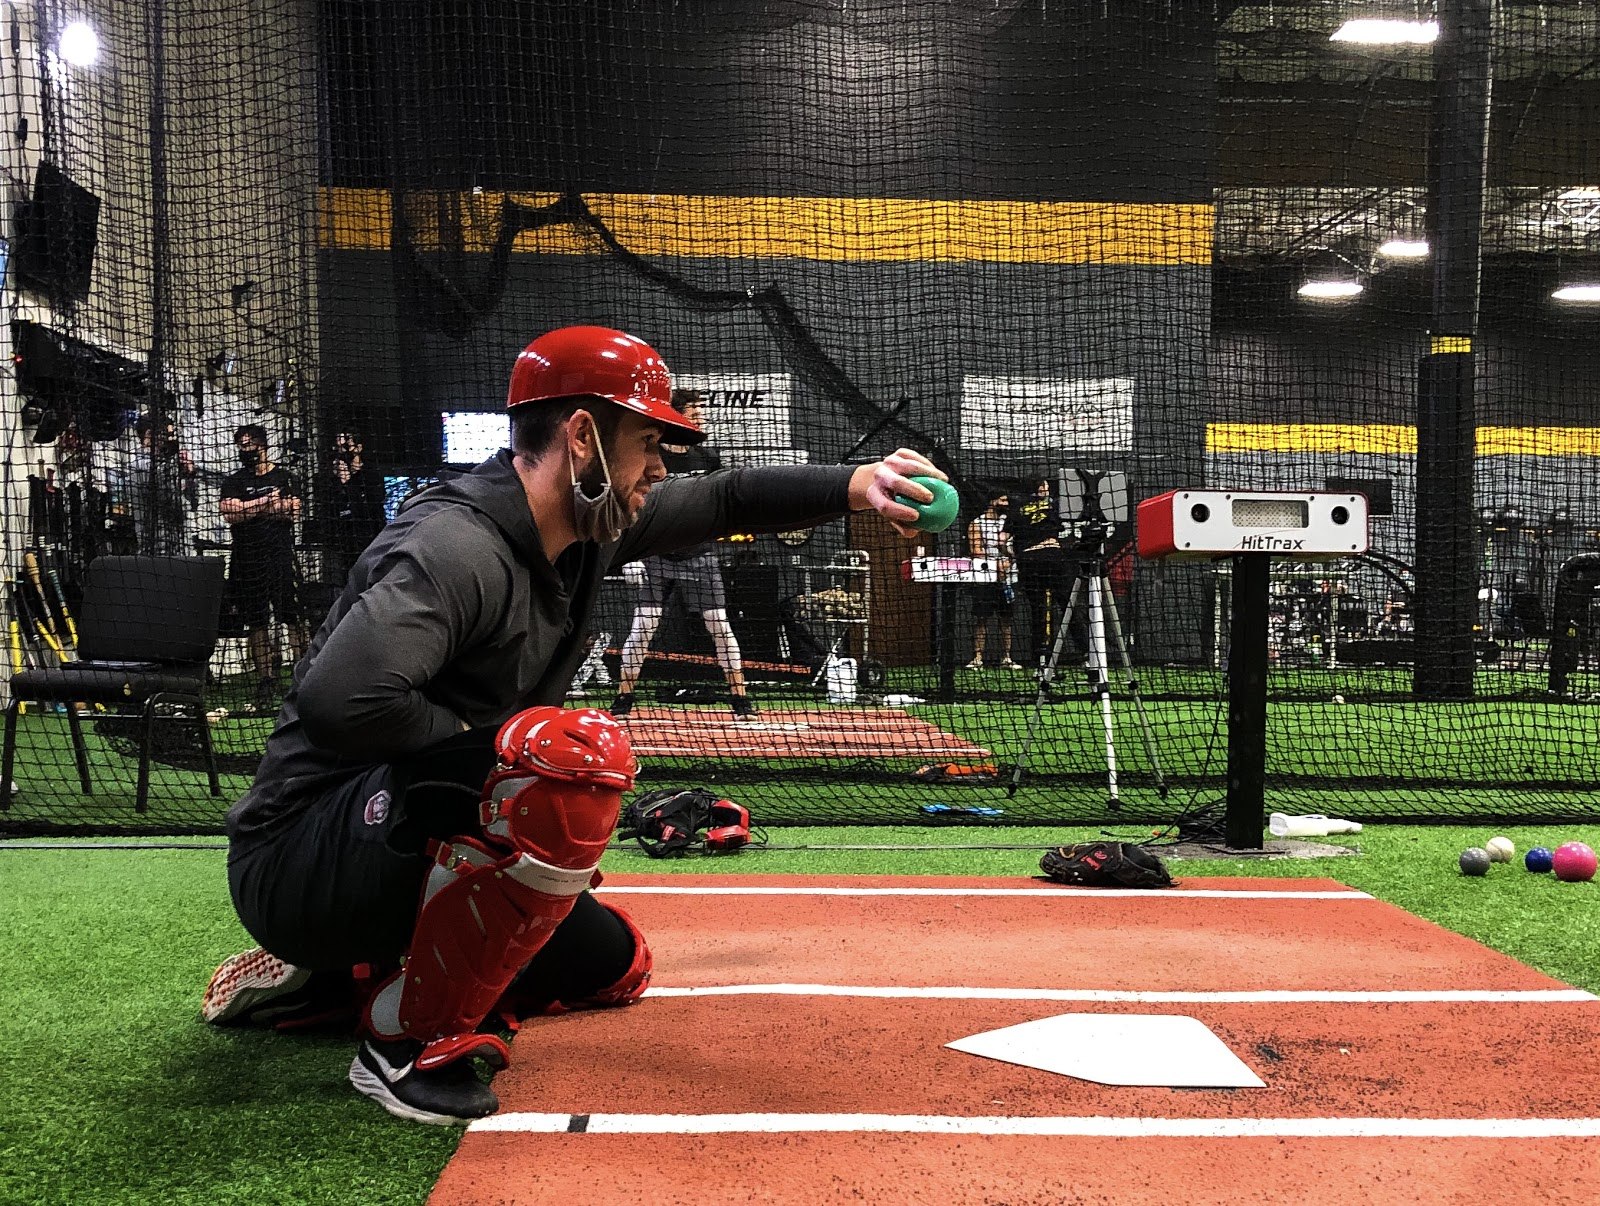 An Introduction to Training the - Driveline Baseball